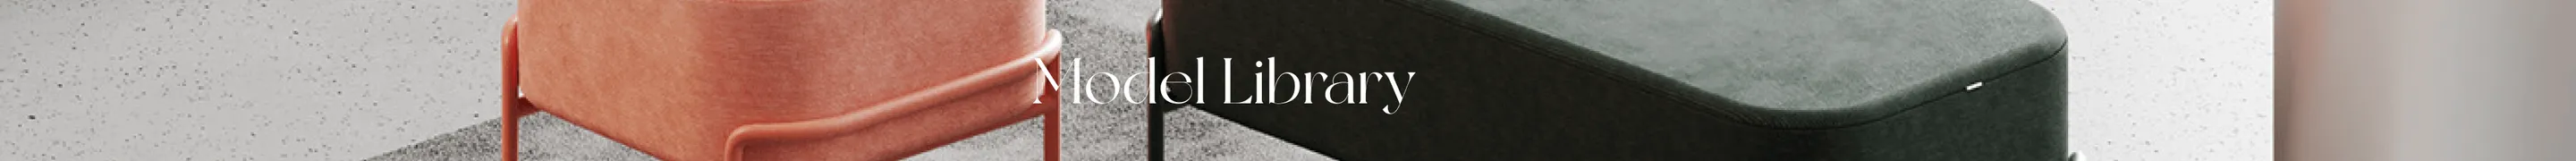 Model Library